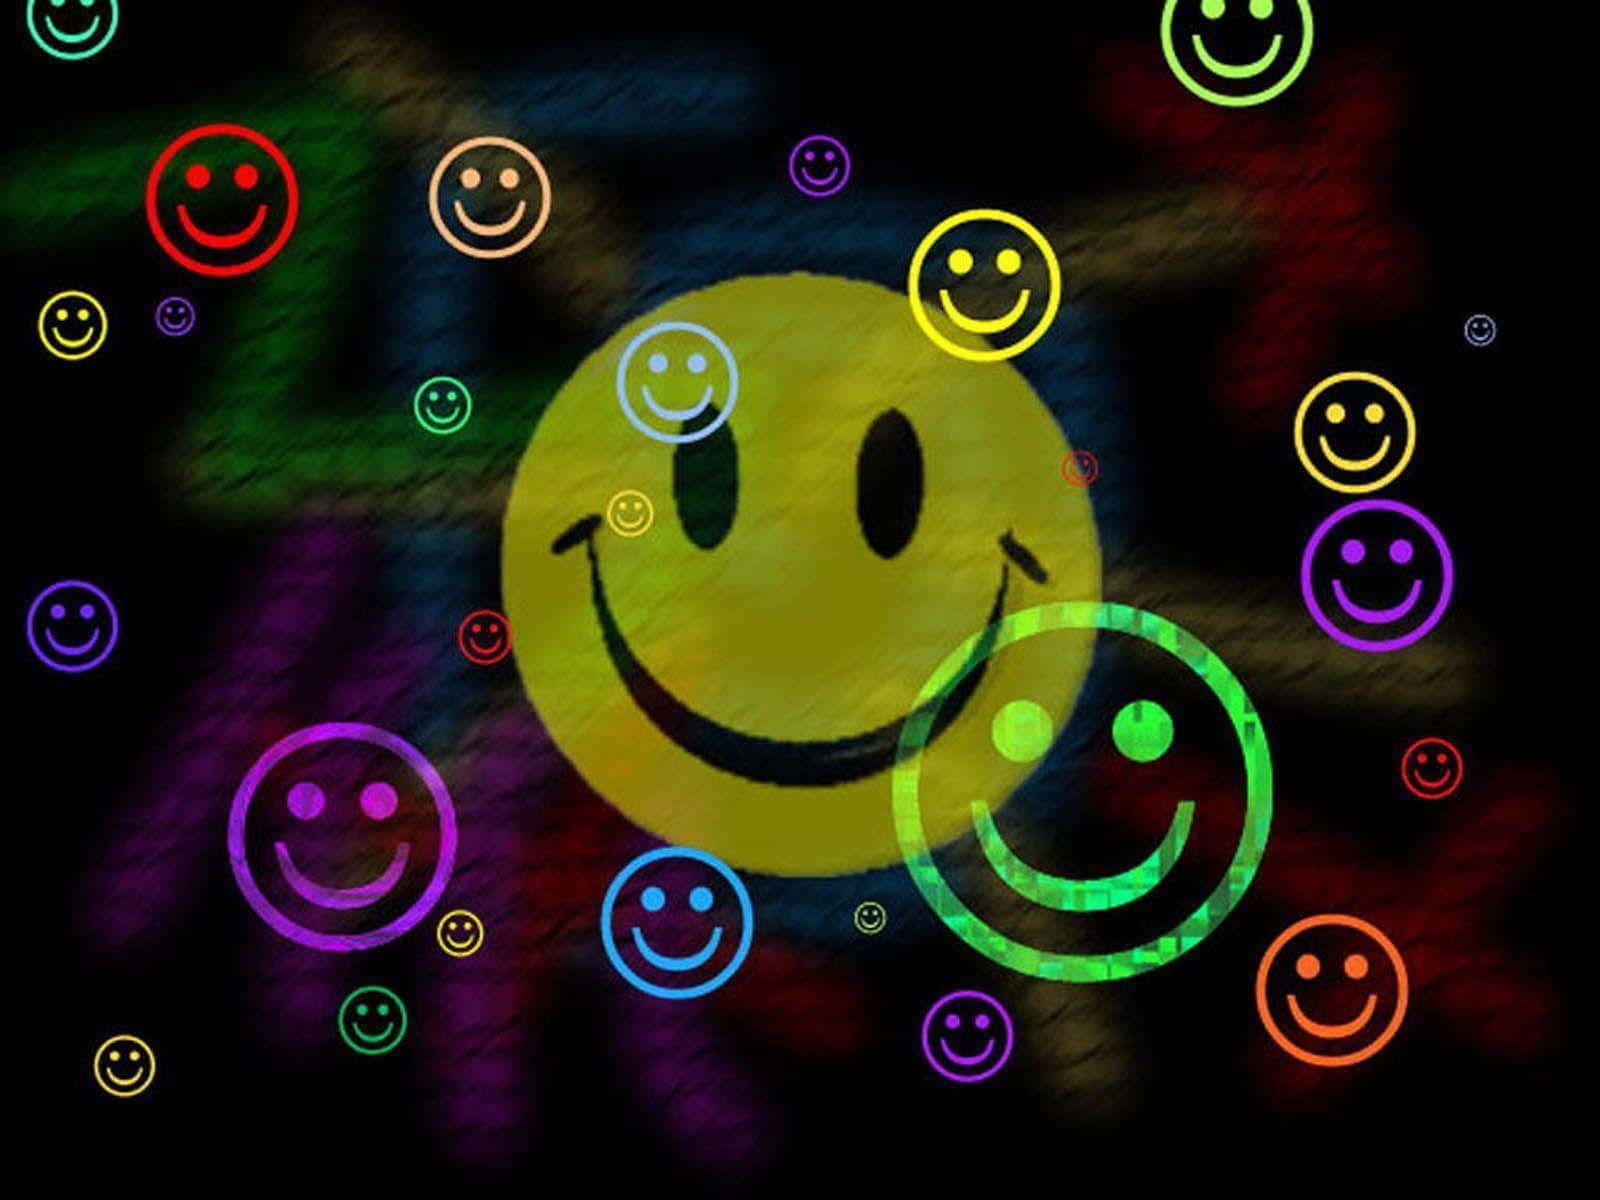 A smiley face with many different colored emoticons - Smiley